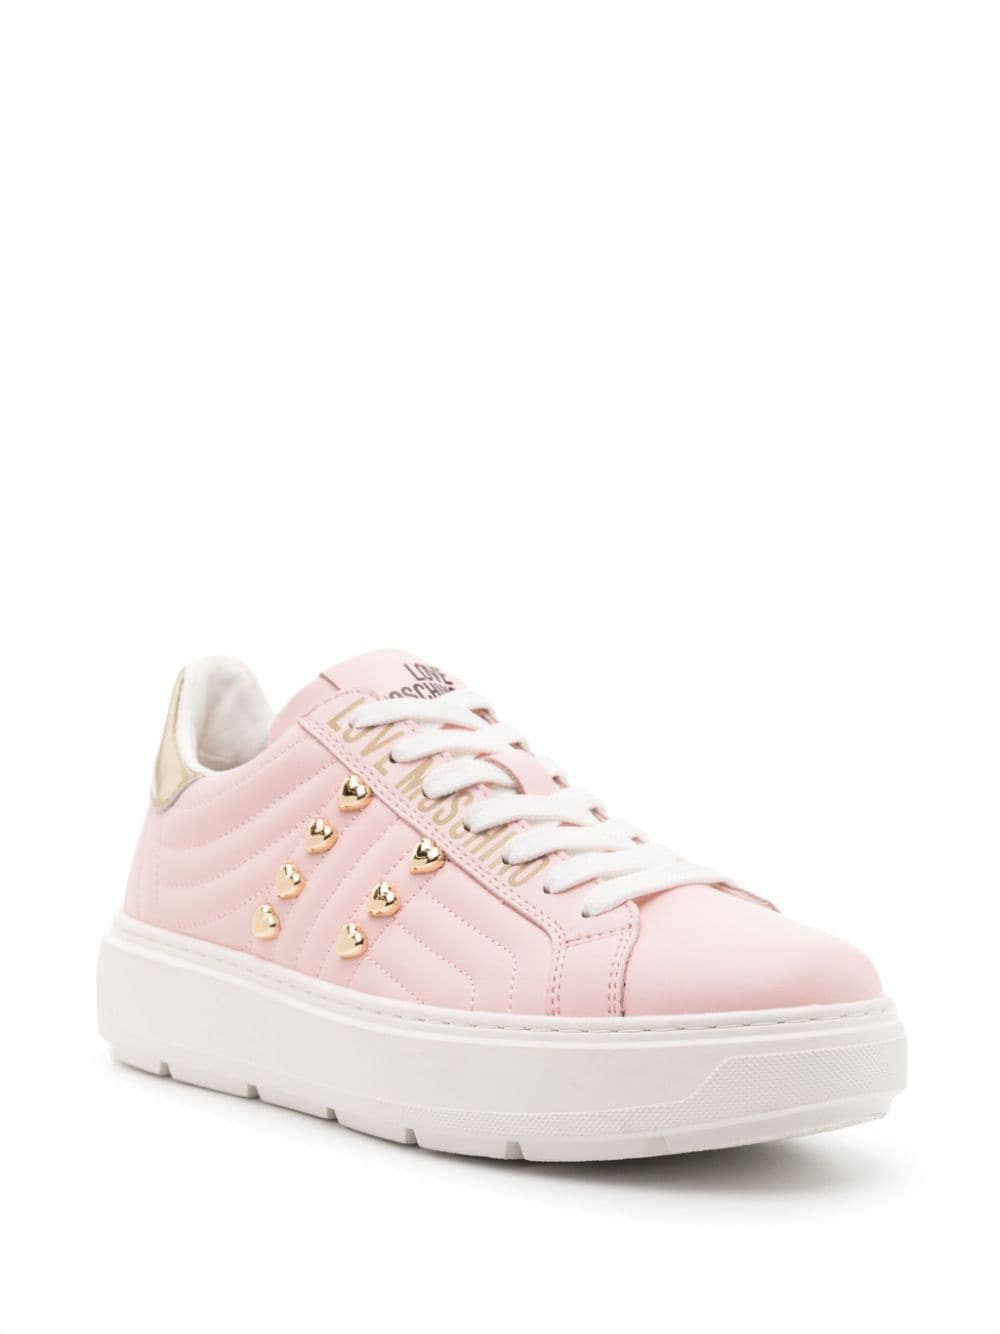 Image 2 of Love Moschino stud-embellished leather sneakers